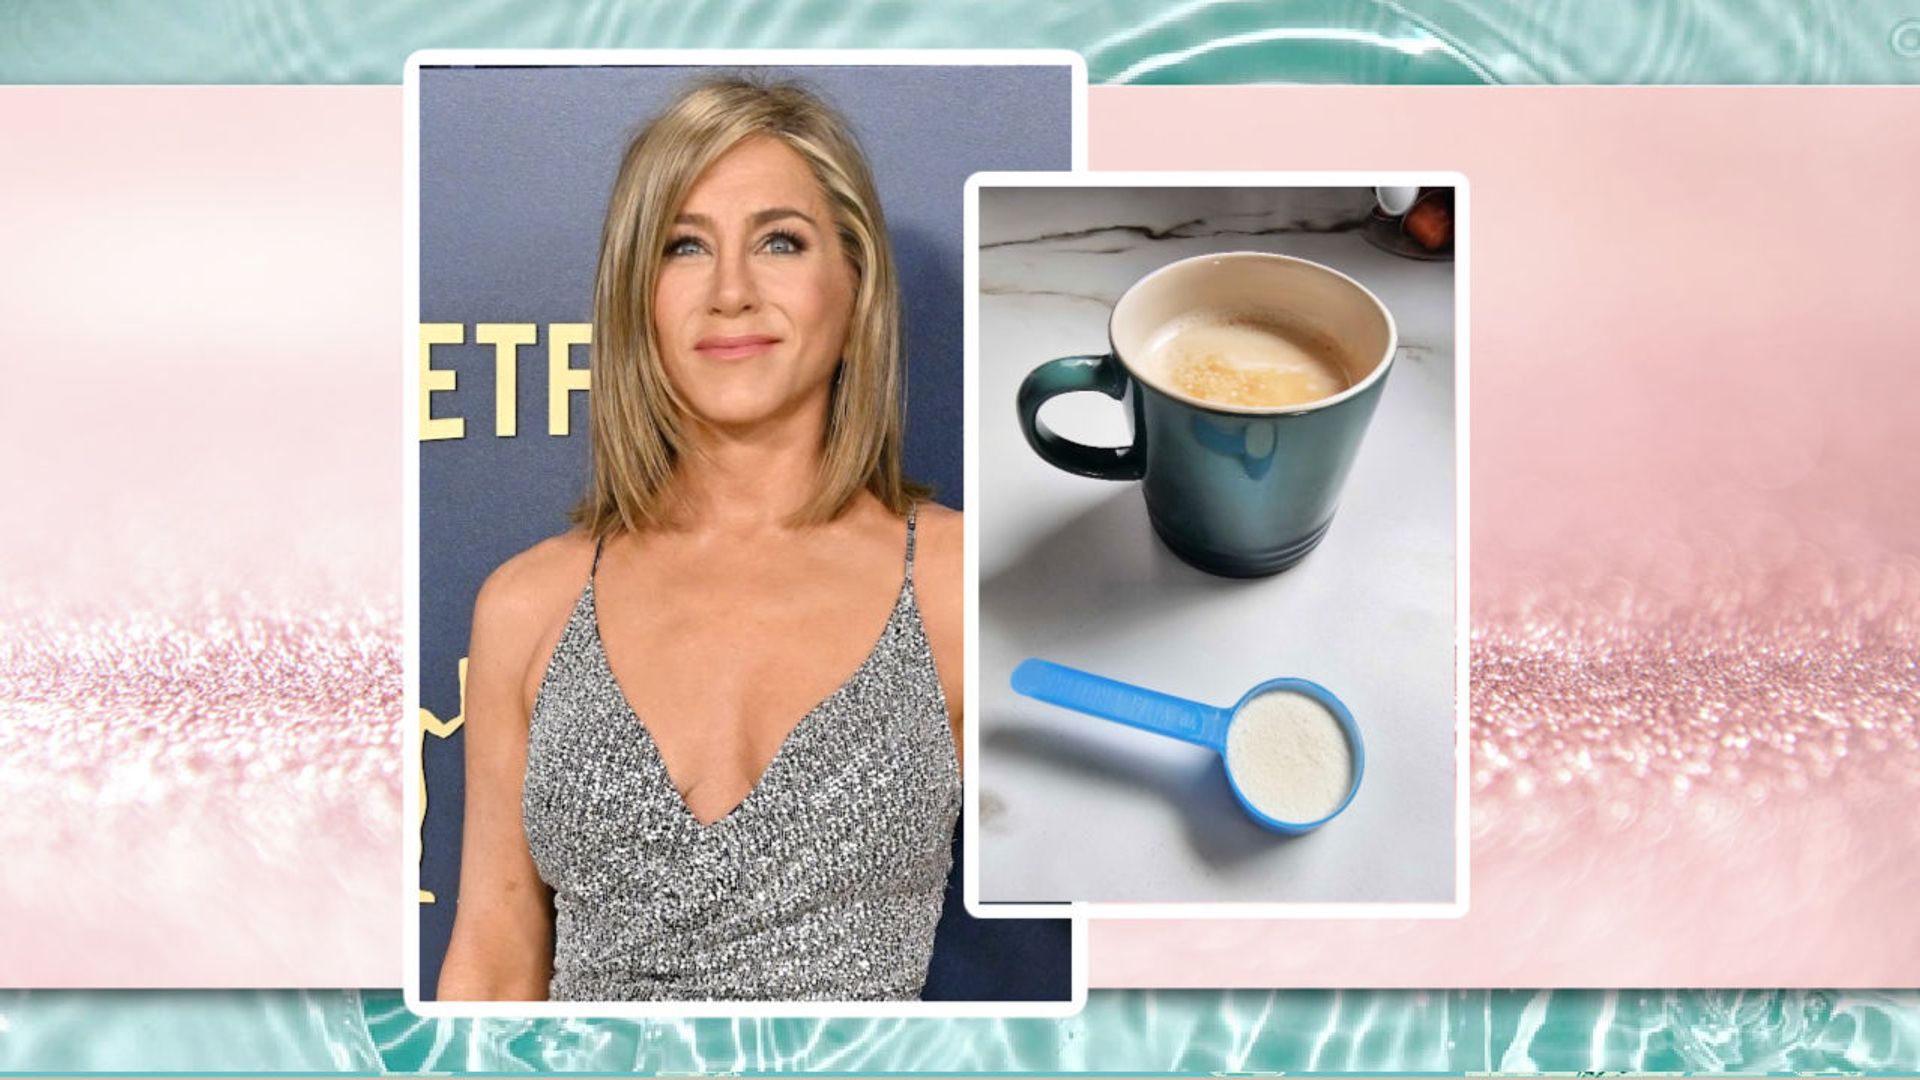 Jennifer Aniston puts this beauty collagen powder in her coffee - so I tried it